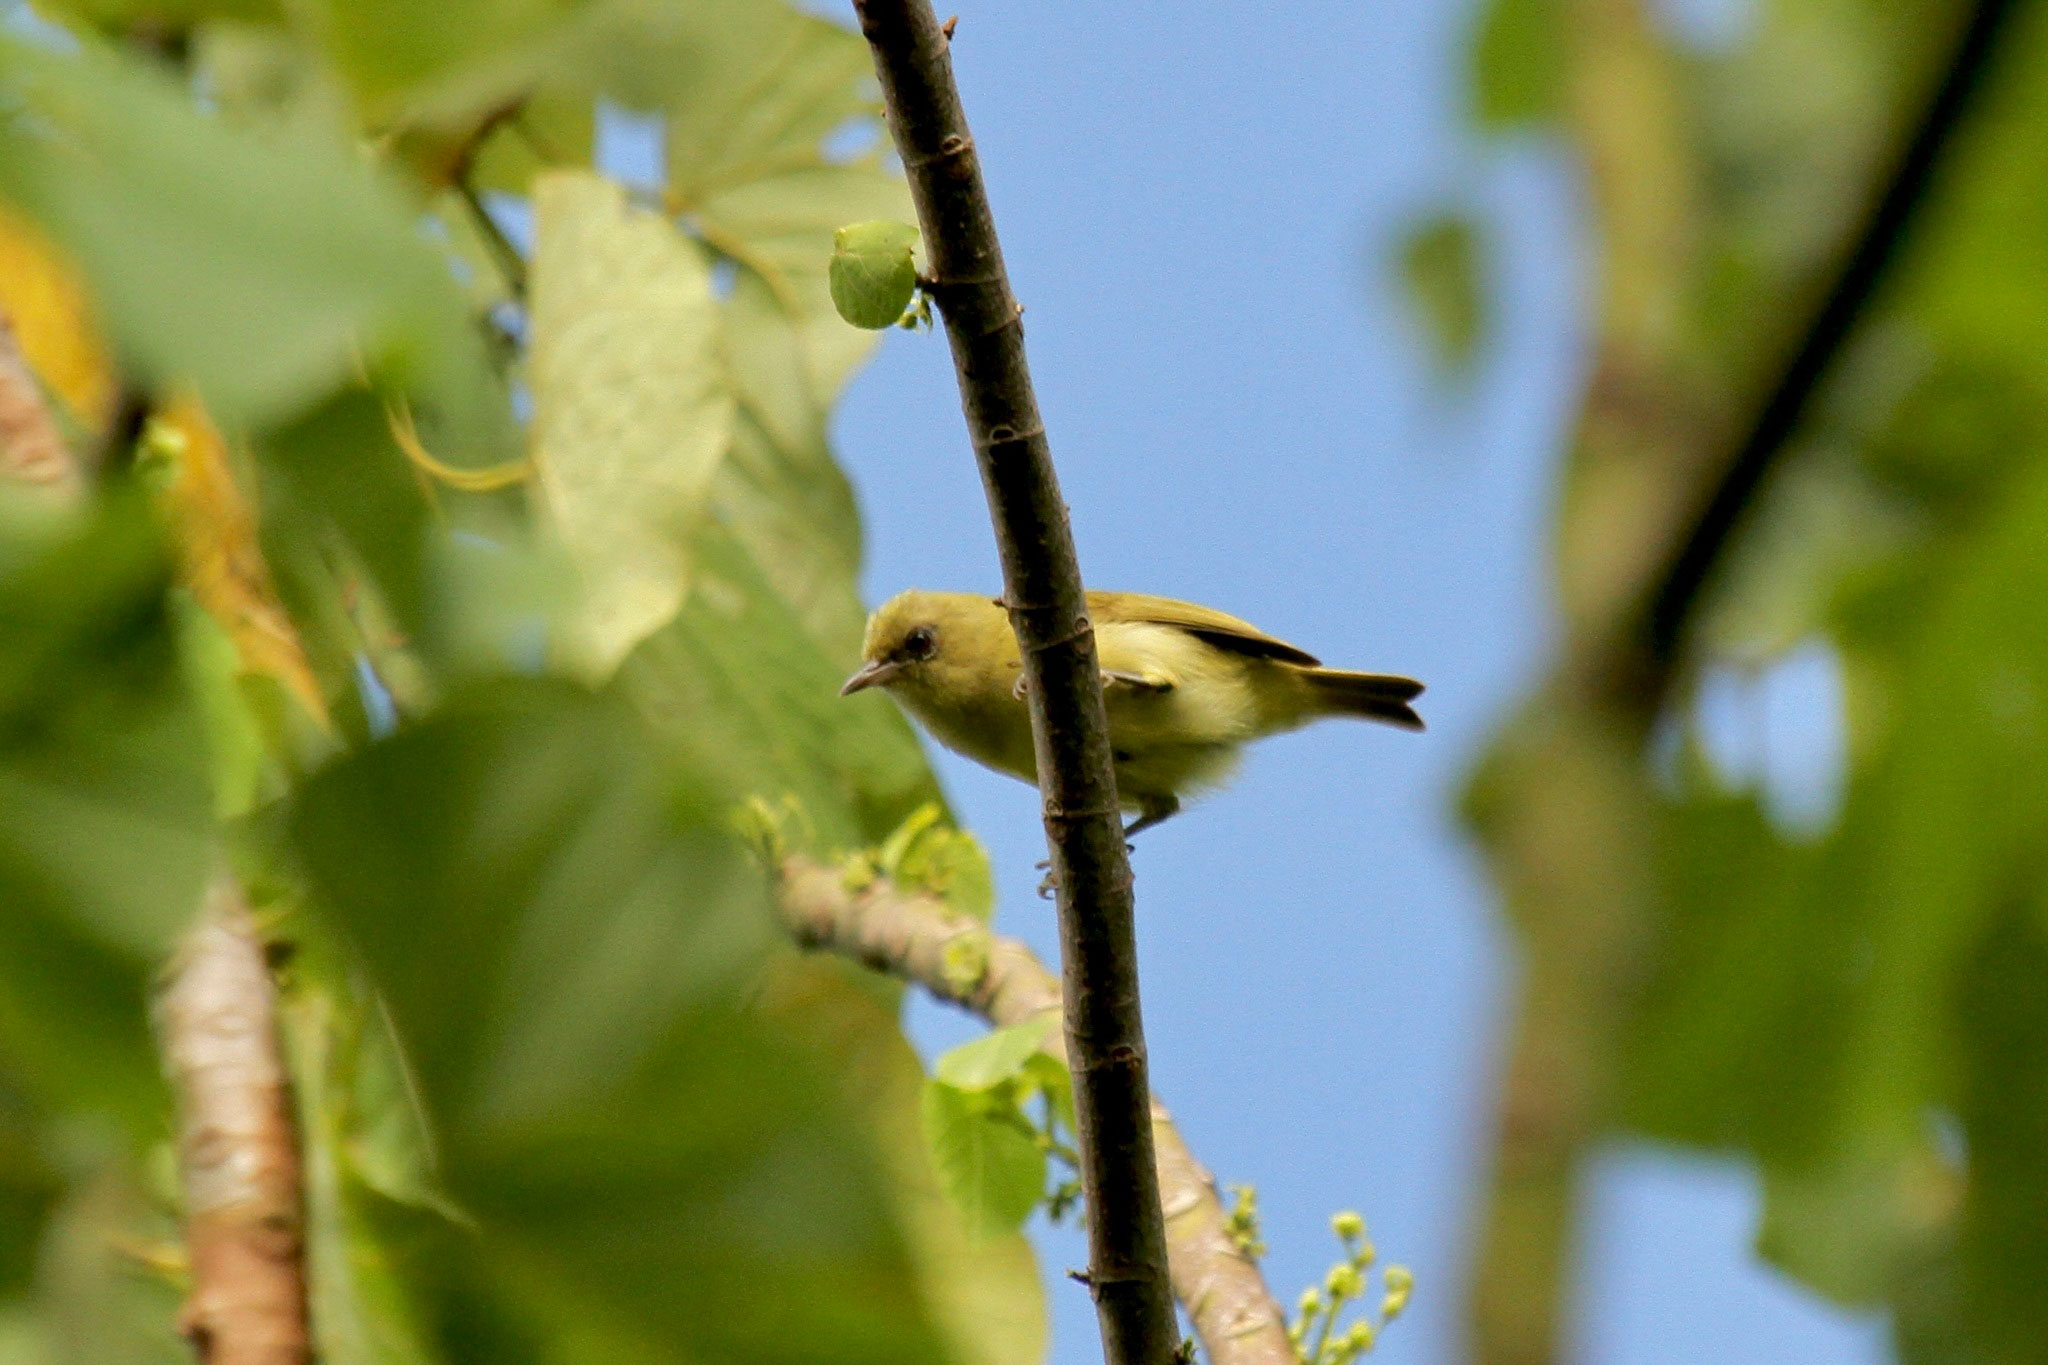 Photograph of a Santa Cruz white-eye, a type of bird, perched on a branch. The bird is shown from below. It is small and yellow with a black eye.